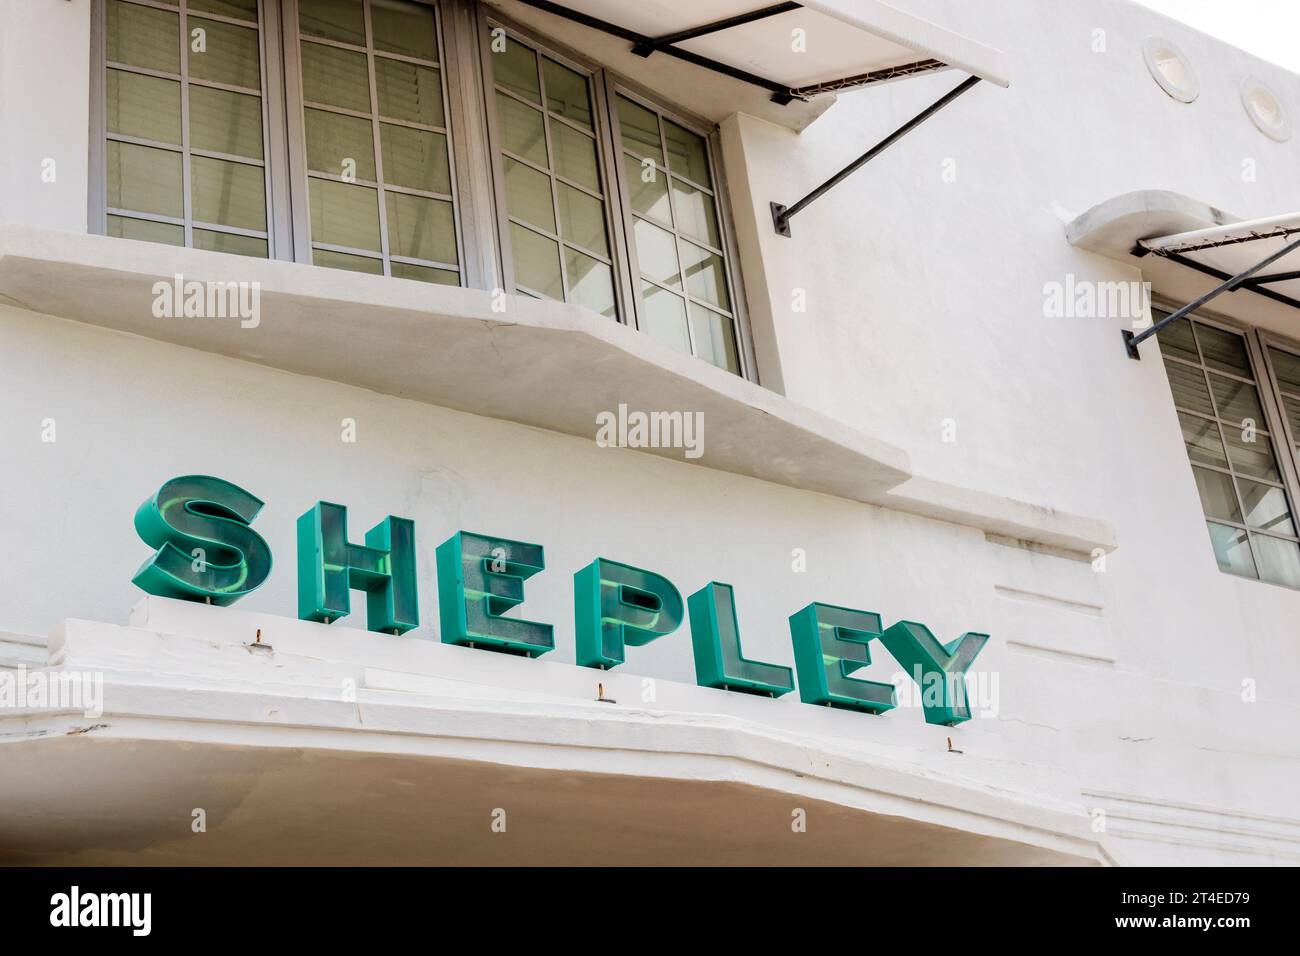 Miami Beach Florida,outside exterior,building front entrance hotel,Collins Avenue,The Shepley Hotel sign,hotels motels businesses Stock Photo